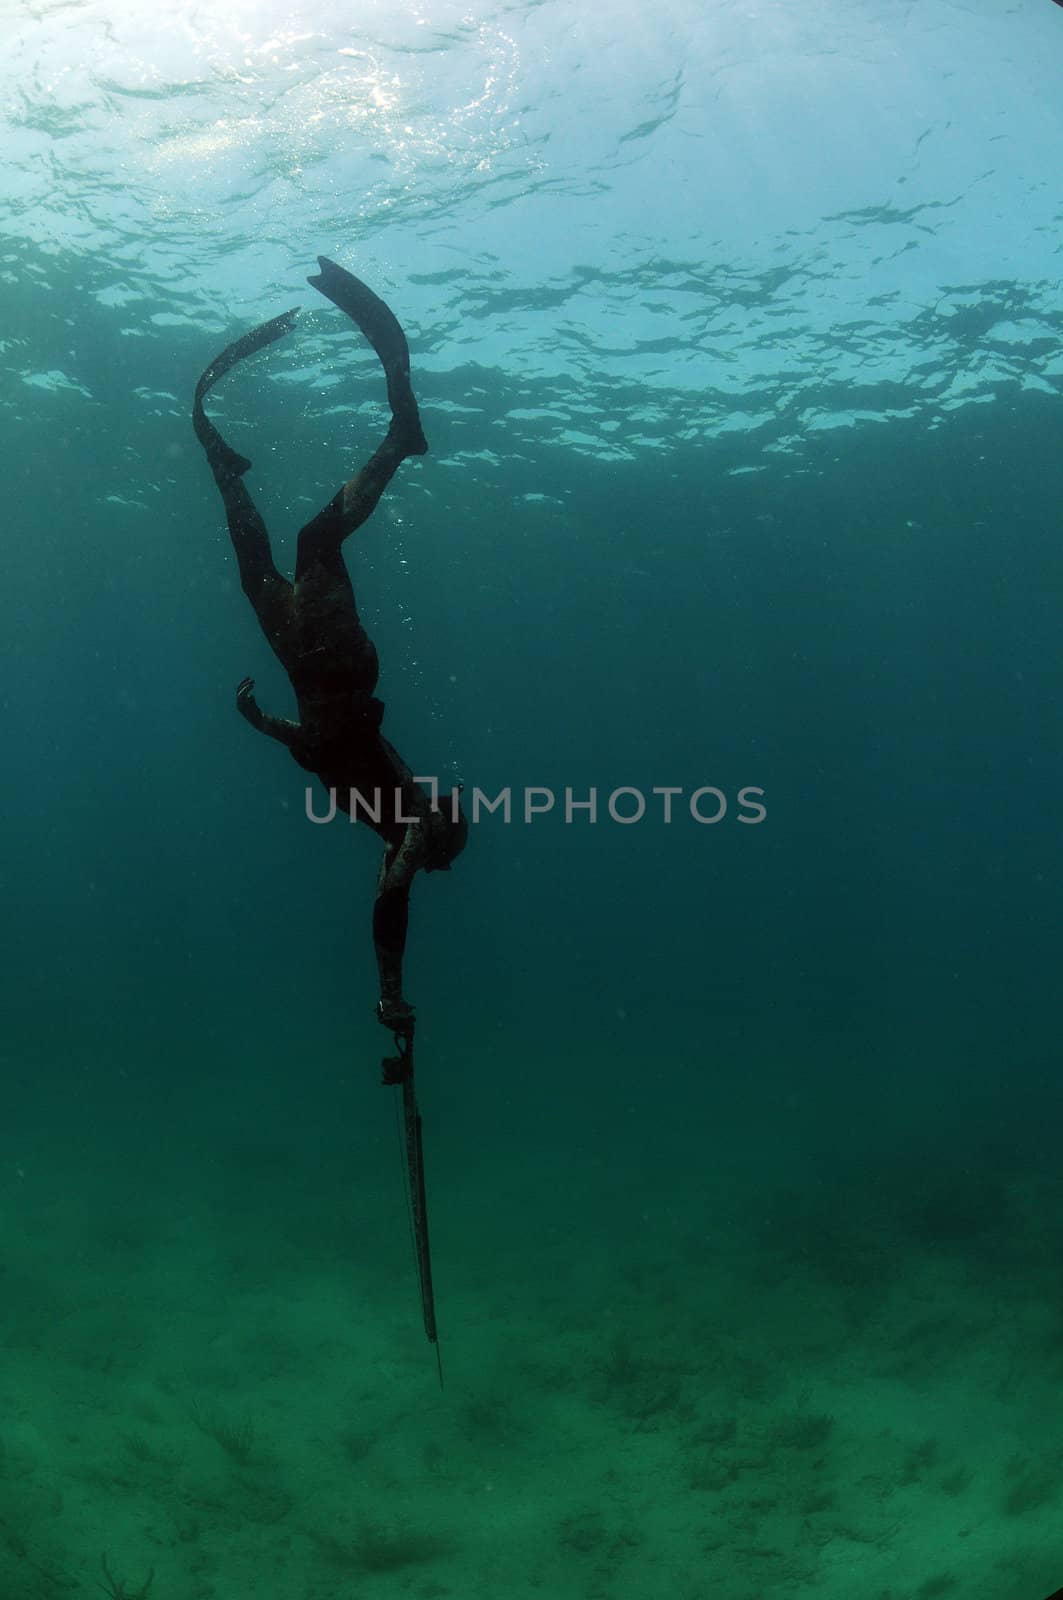 Man free diving and spearfishing in camouflage wetsuit in Atlantic Ocean